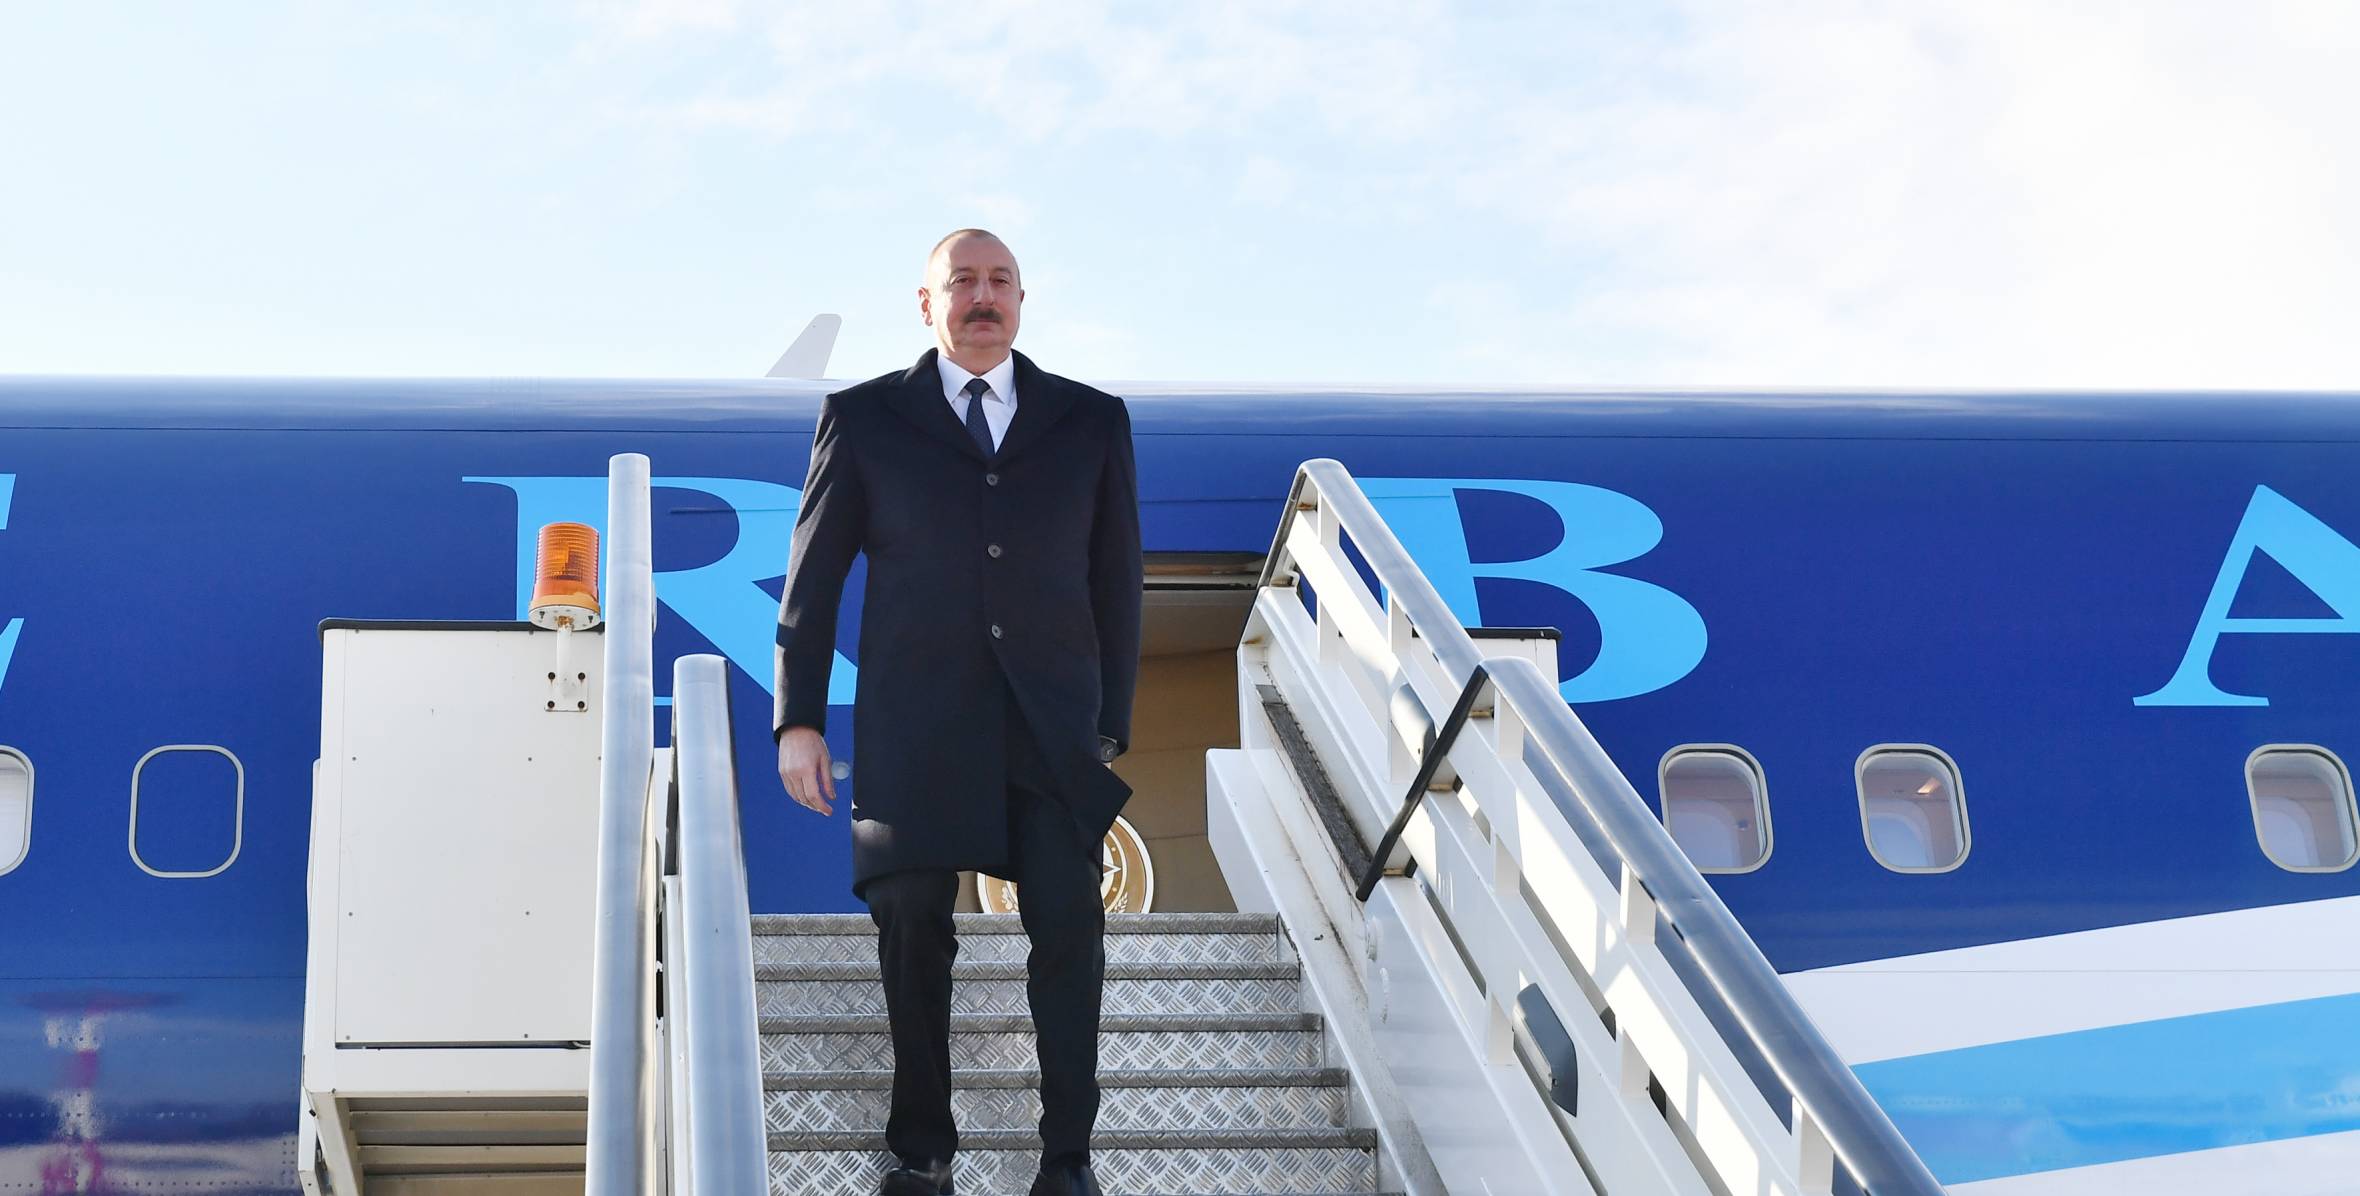 Ilham Aliyev arrived in Serbia for working visit